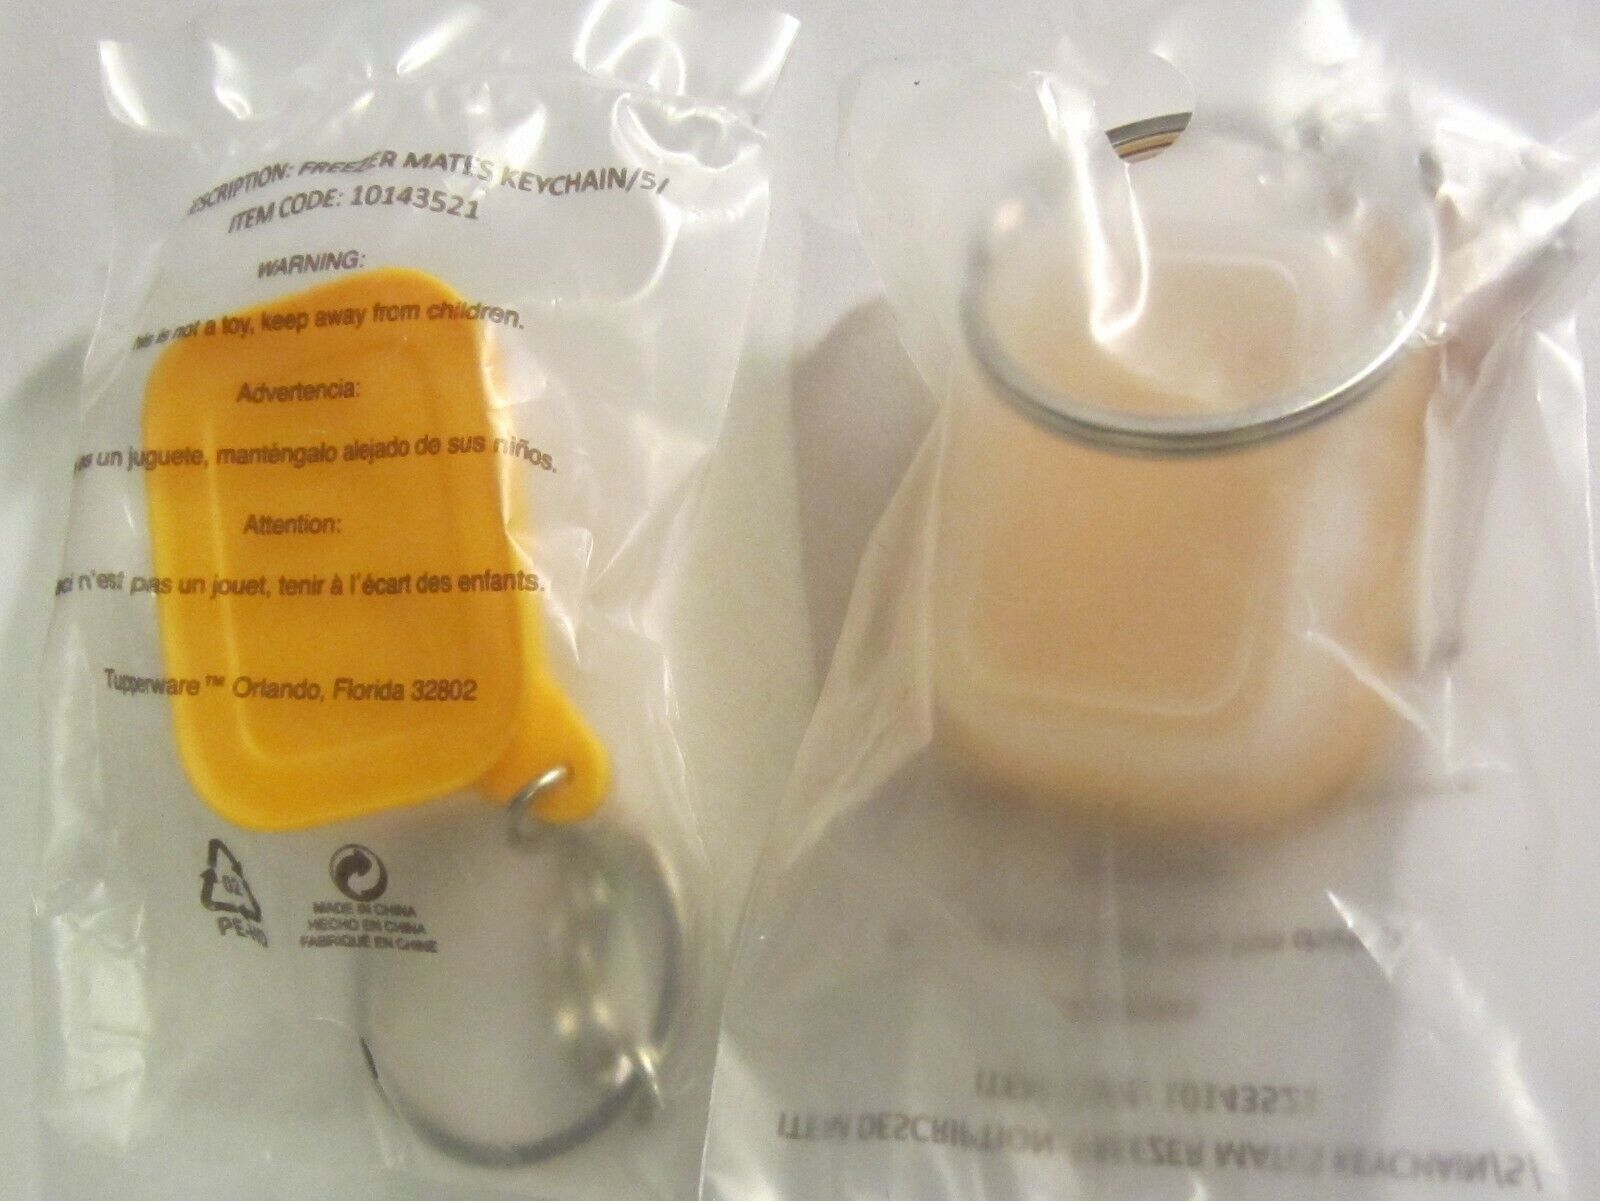 Primary image for Tupperware Mini Freezer Mates Container Keychain with Orange Seal NEW